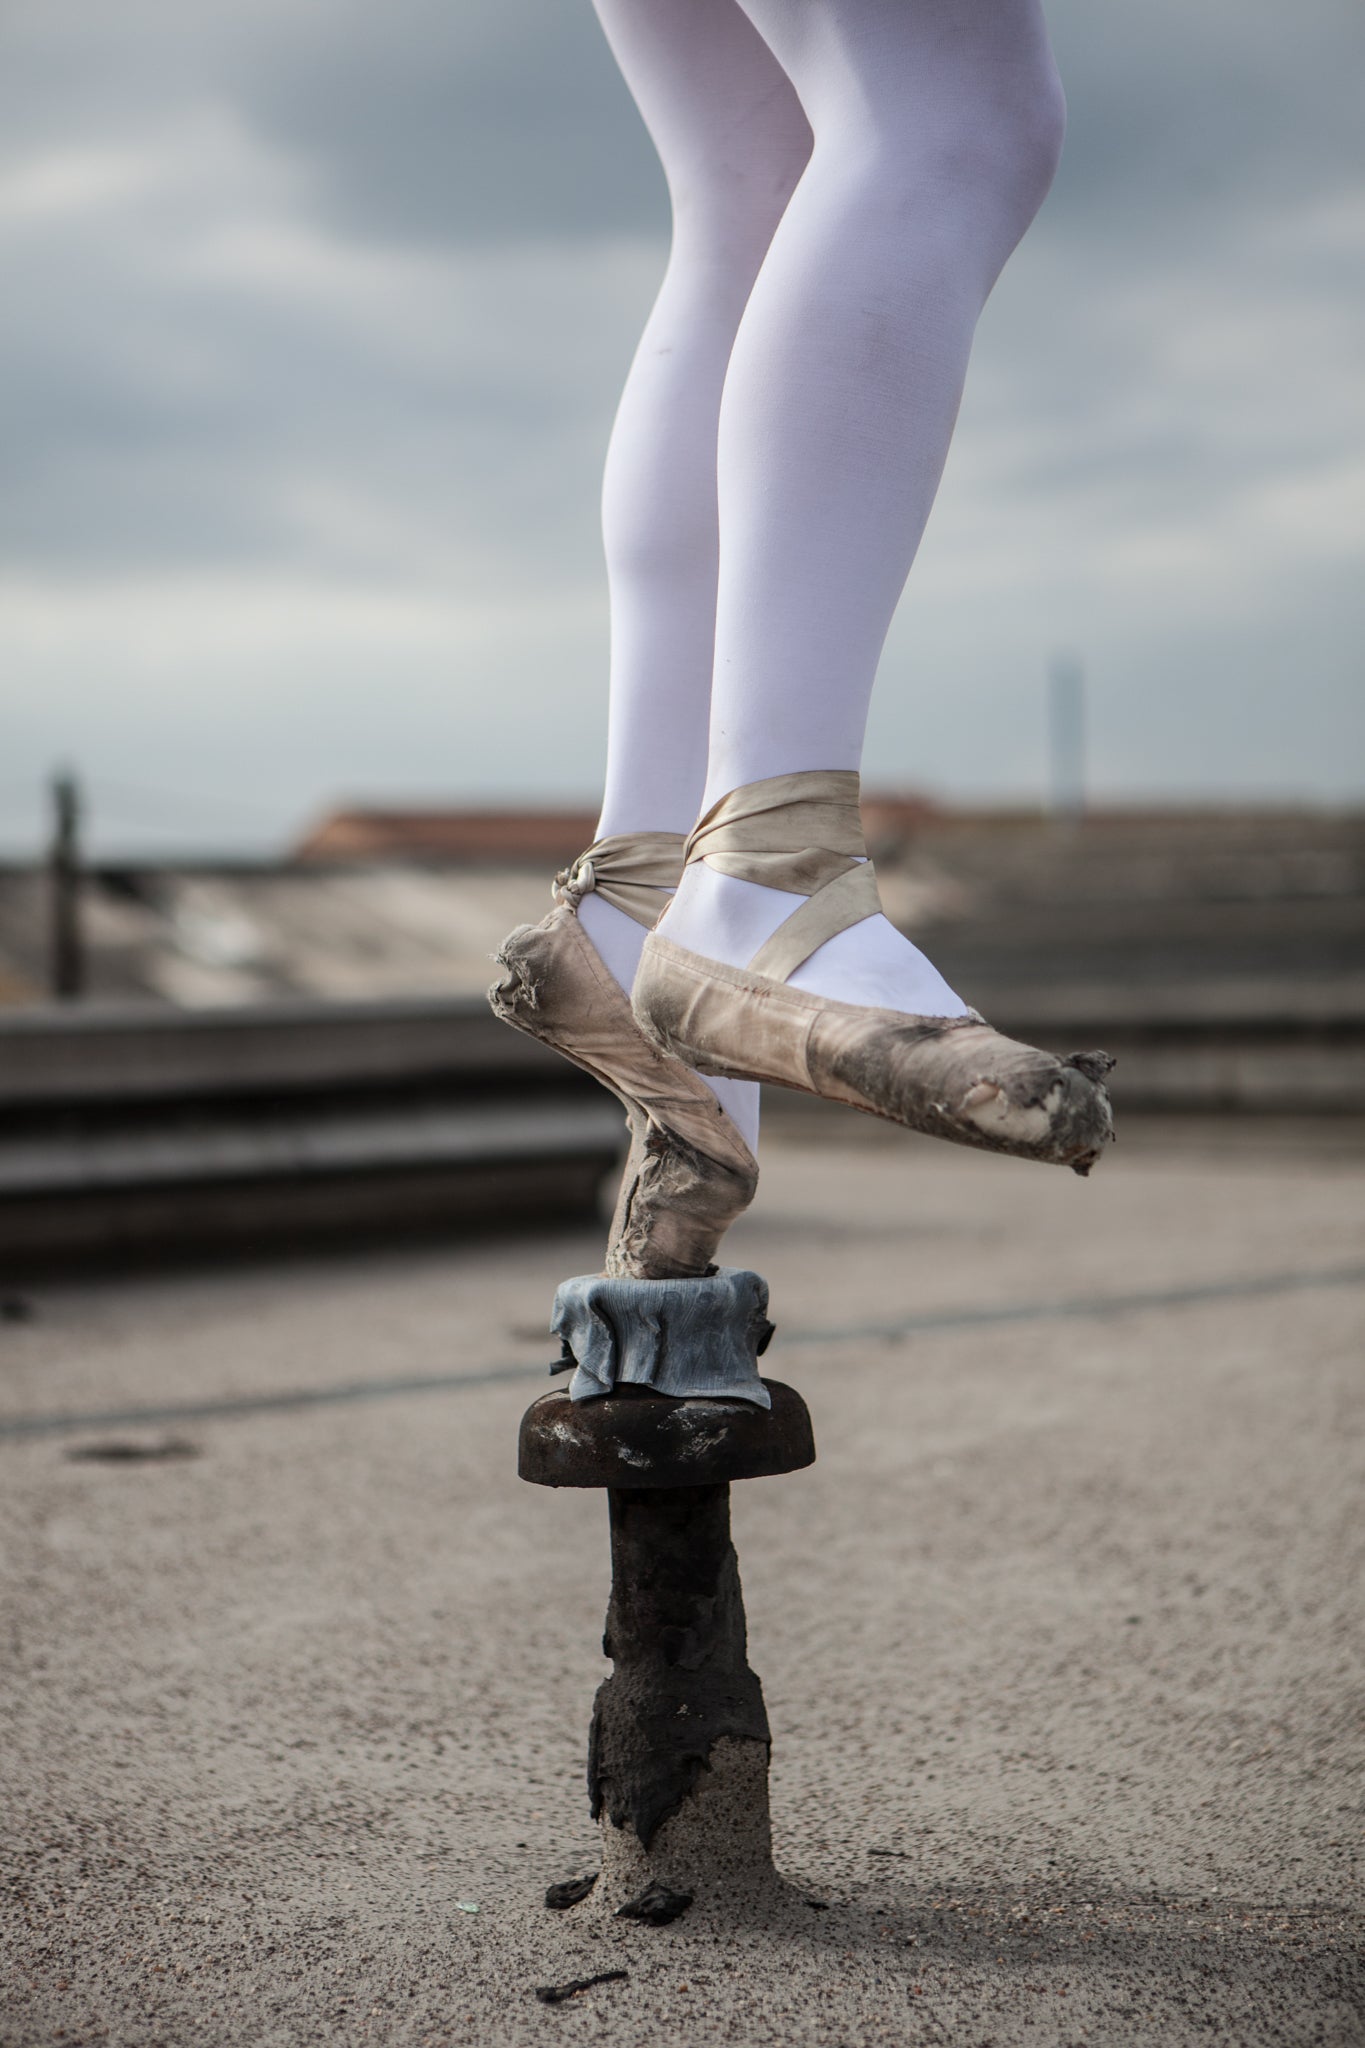 Dancers on Rooftops: "Mara Ladysage" - Exhibition Display Discounted Print (UK Delivery / London Pick-Up Only, DoR-EDDP-GSB)